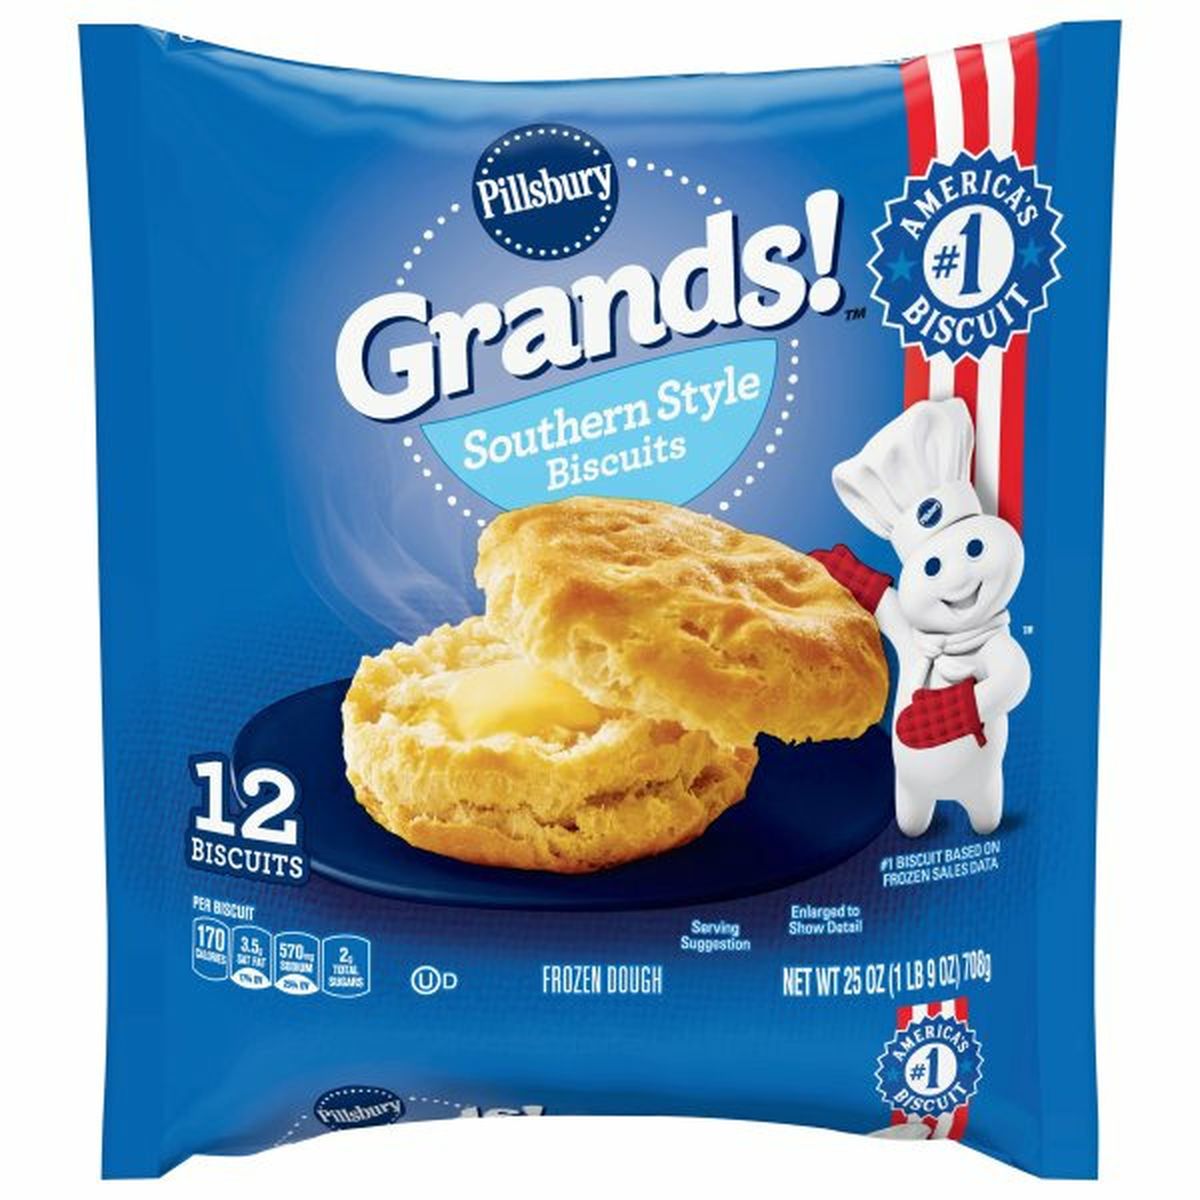 Calories in Pillsbury Grands! Biscuits, Southern Style, Value Pack